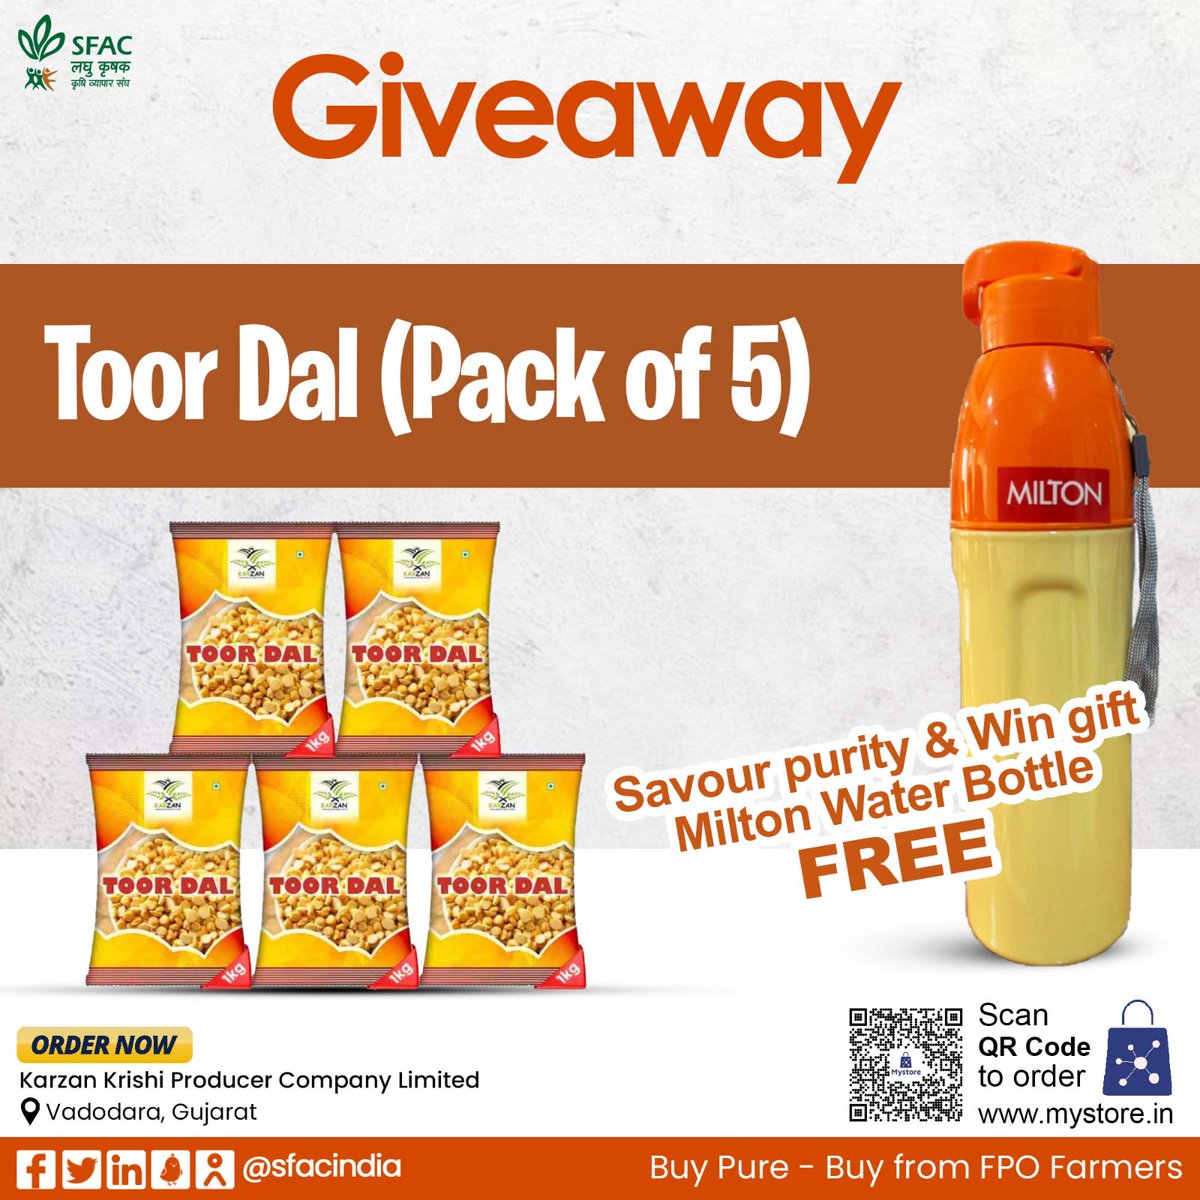 Giveaway🎁 Get a milton water bottle FREE on purchase of 5 kg unpolished, pure & wholesome toor dal. Buy straight from FPO farmers👇 mystore.in/en/product/too… 😋 @AgriGoI @MOFPI_GOI @MinOfCooperatn @CMOGuj @jagograhakjago @ONDC_Official @PIB_India @mygovindia #VocalForLocal